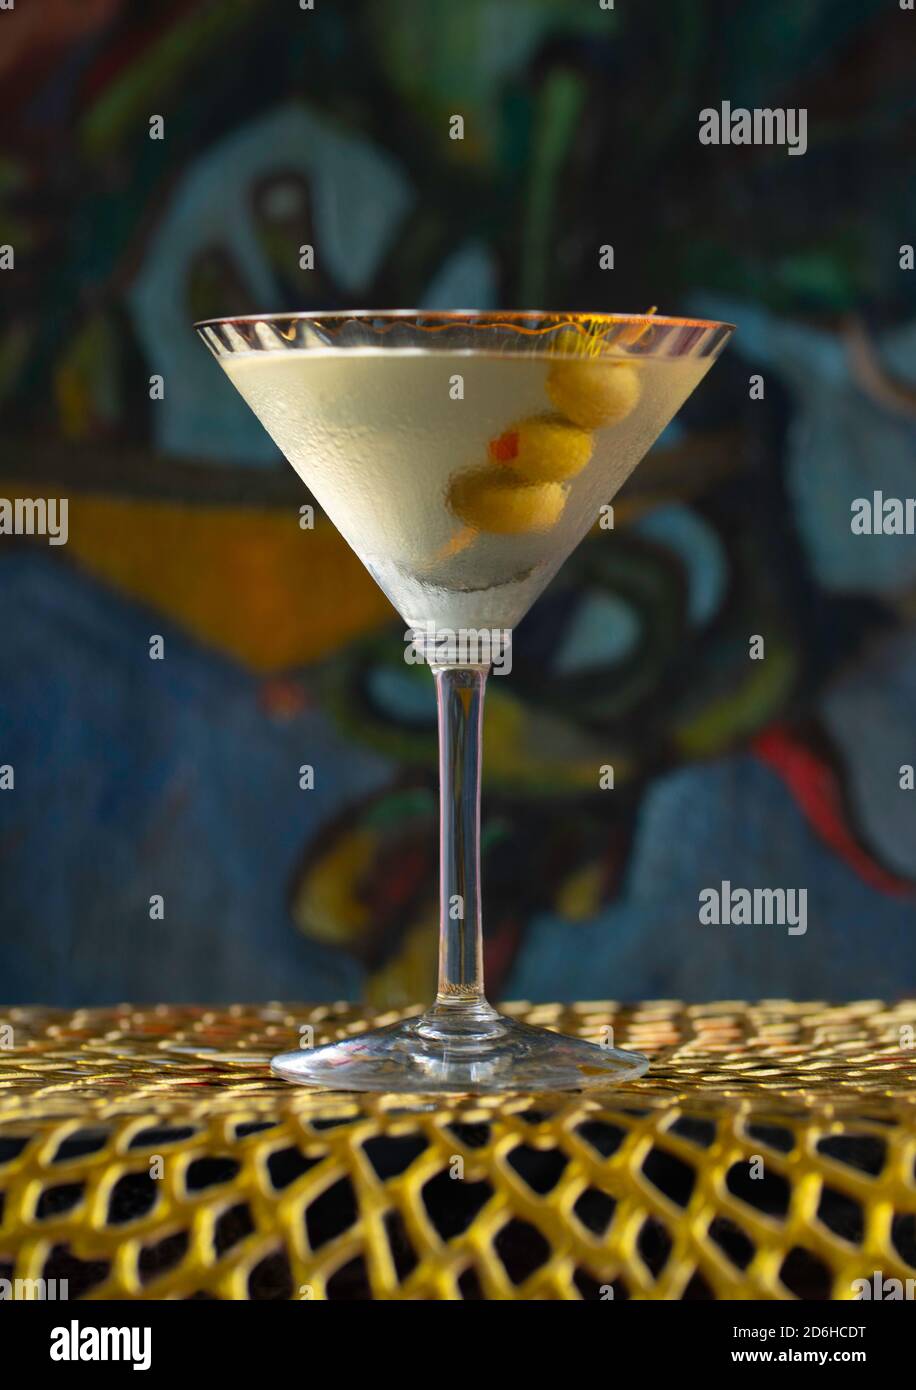 Vodka martini cocktail drink with olives on gold mat in front of painting Stock Photo